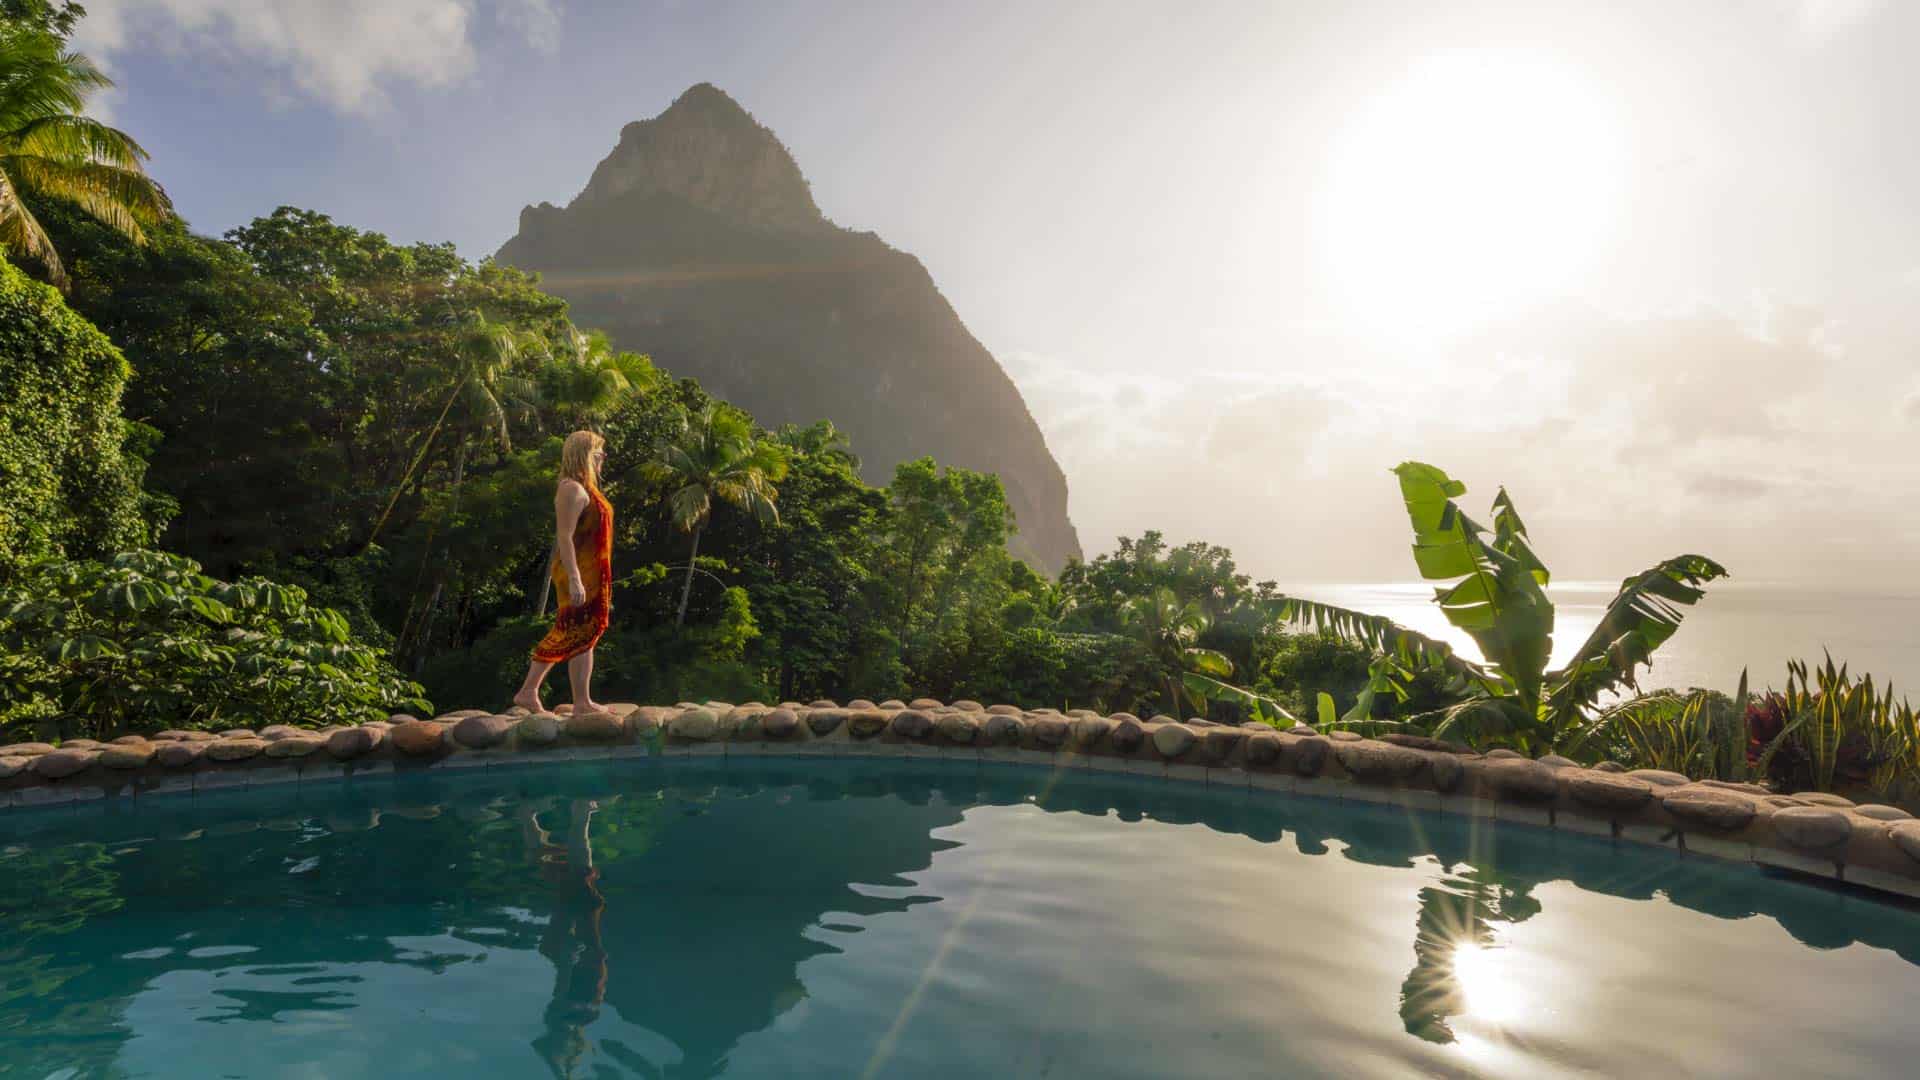 Where to stay in Saint Lucia